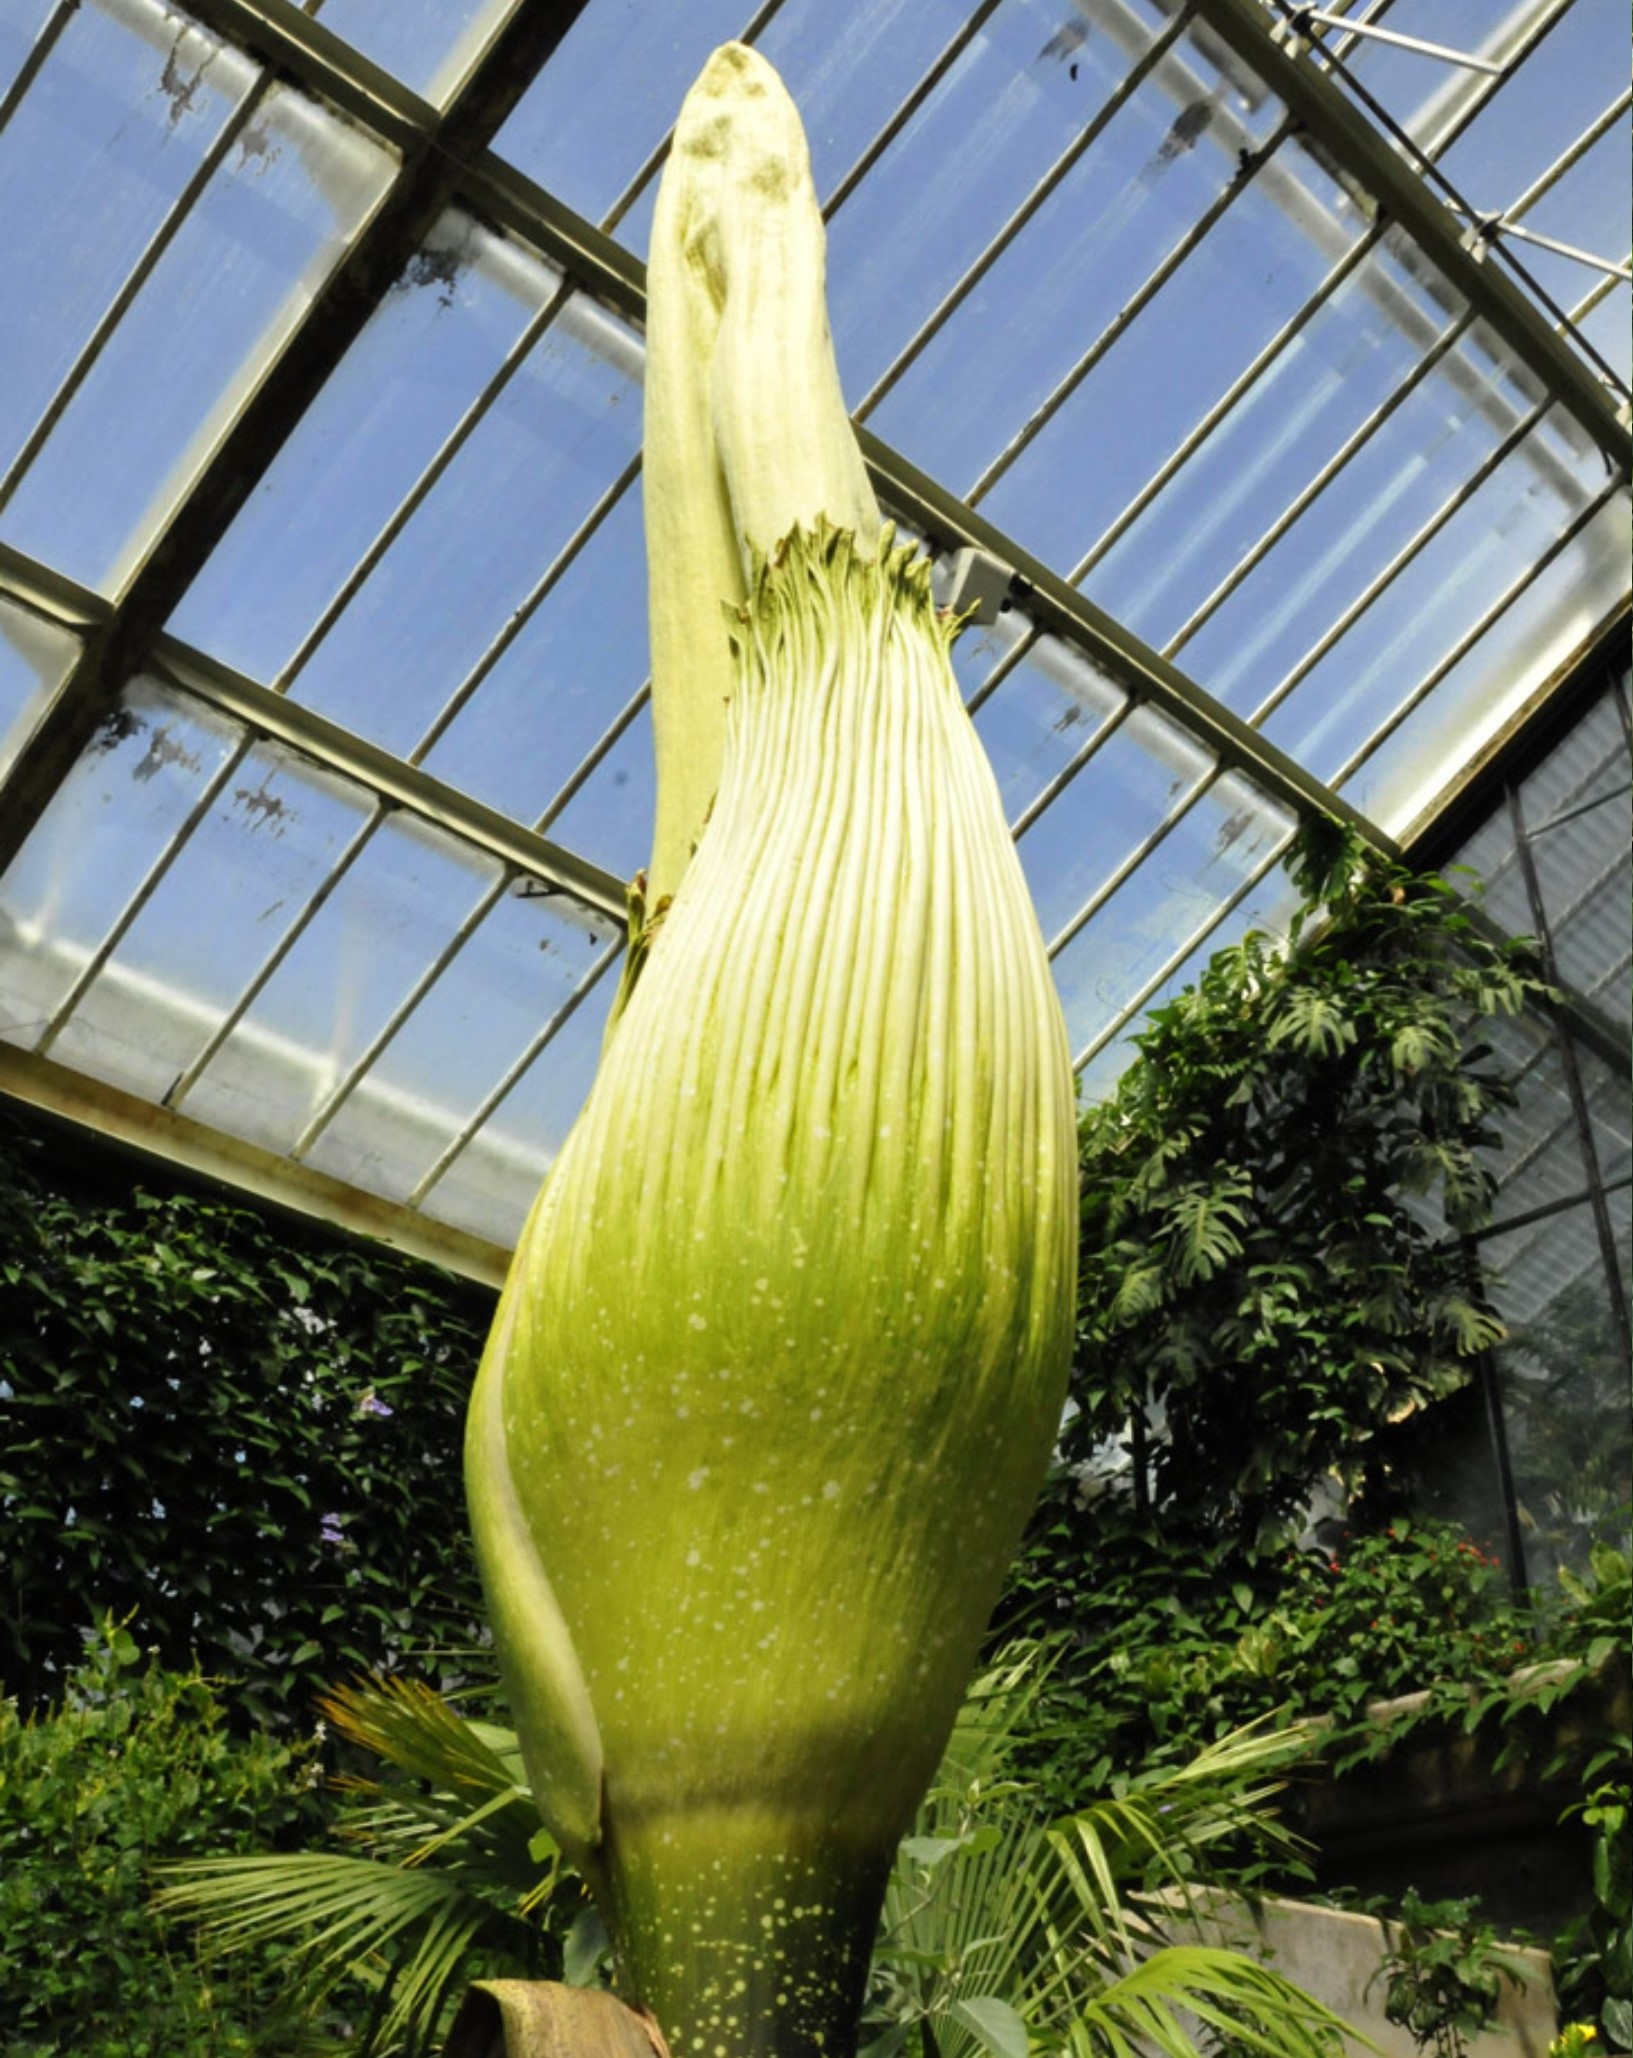 Titan arum (Amorphophallus titanum) with massive inner flower spike surrounded by a green to cream petal-like collar